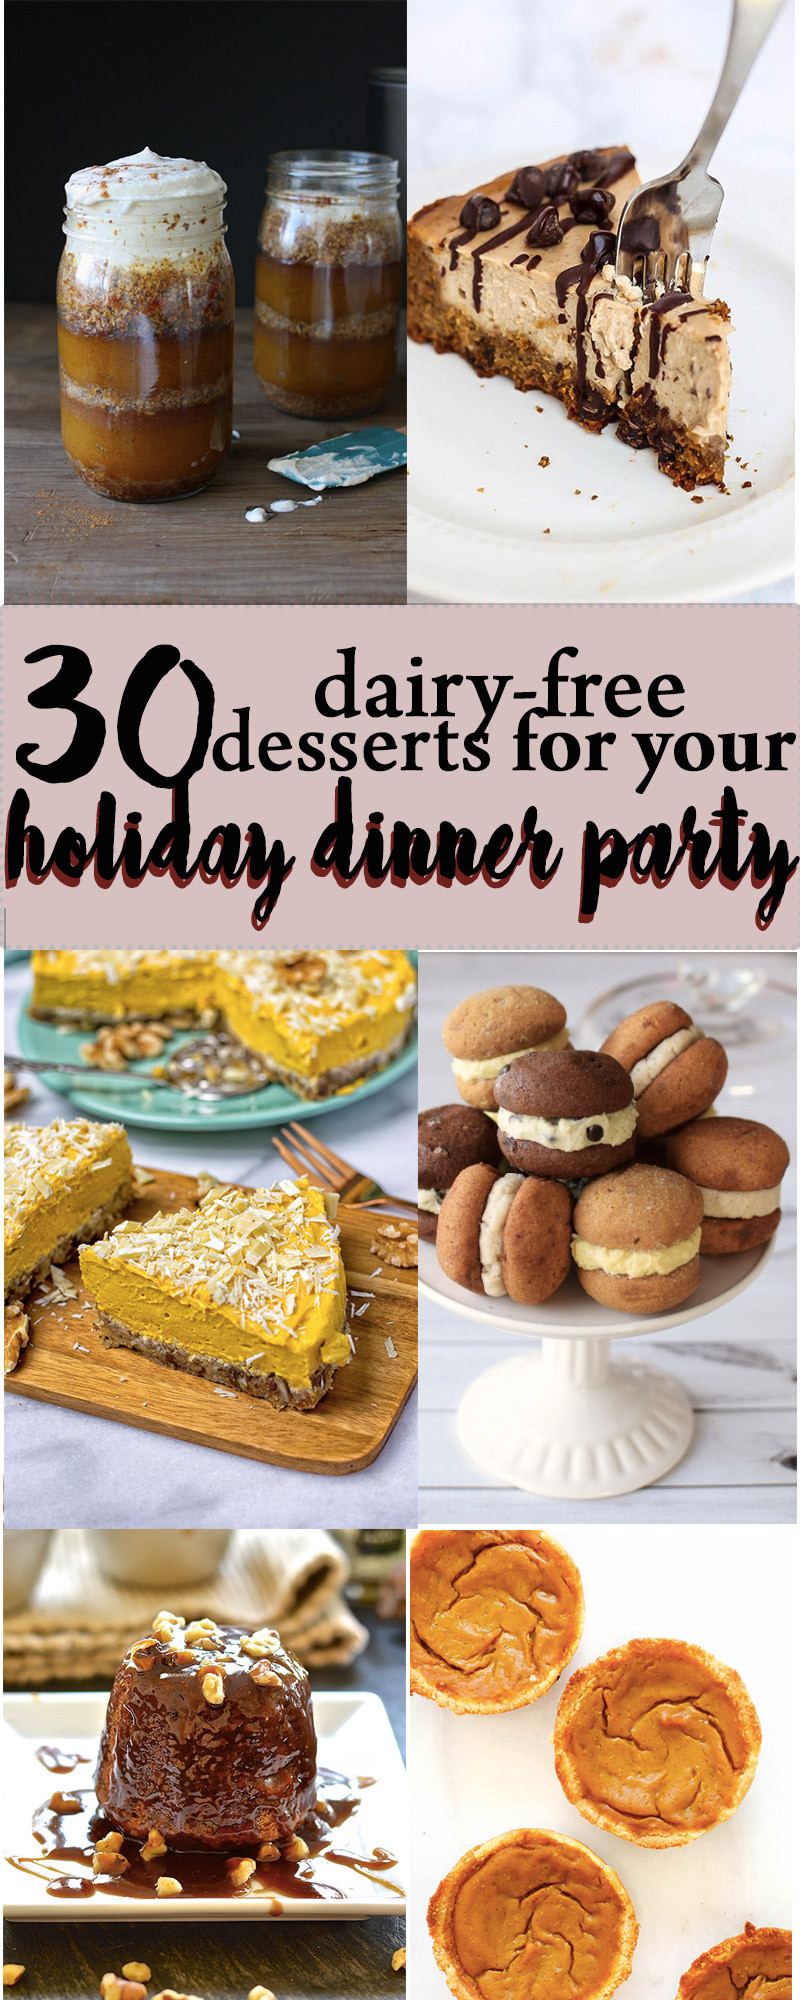 Dairy Free Christmas Desserts
 30 Dairy Free Holiday Desserts for Your Next Dinner Party